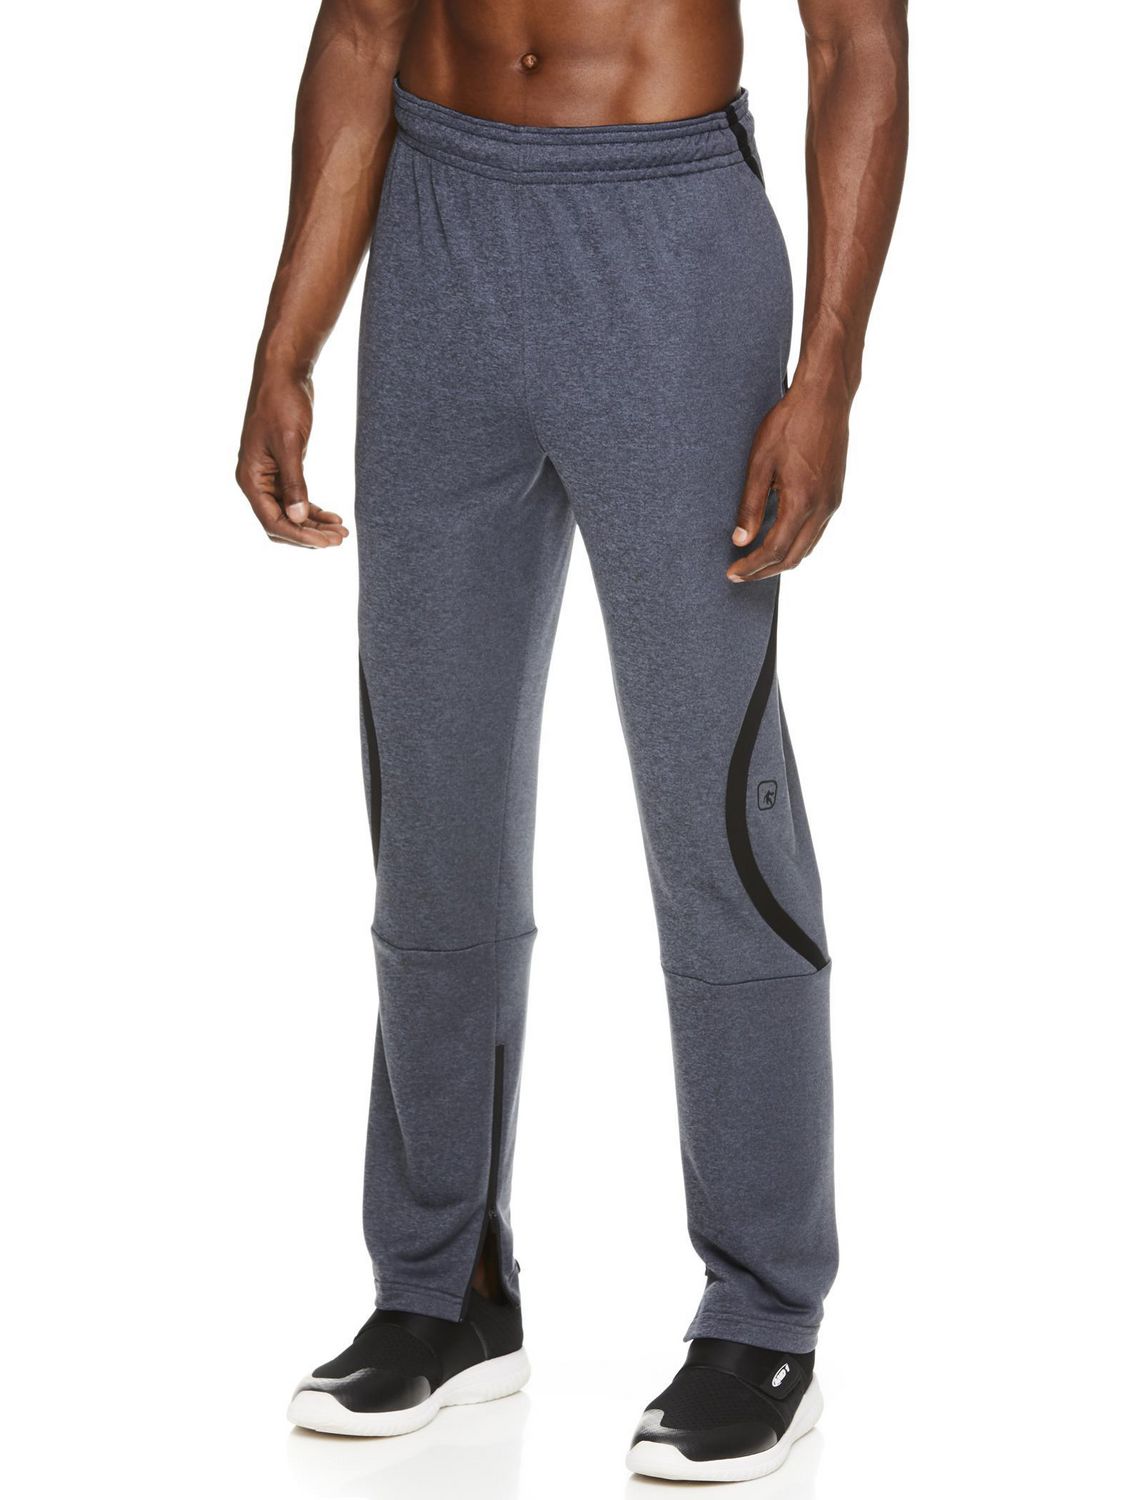 AND1 Men’s Ball Side Bball Pant | Walmart Canada